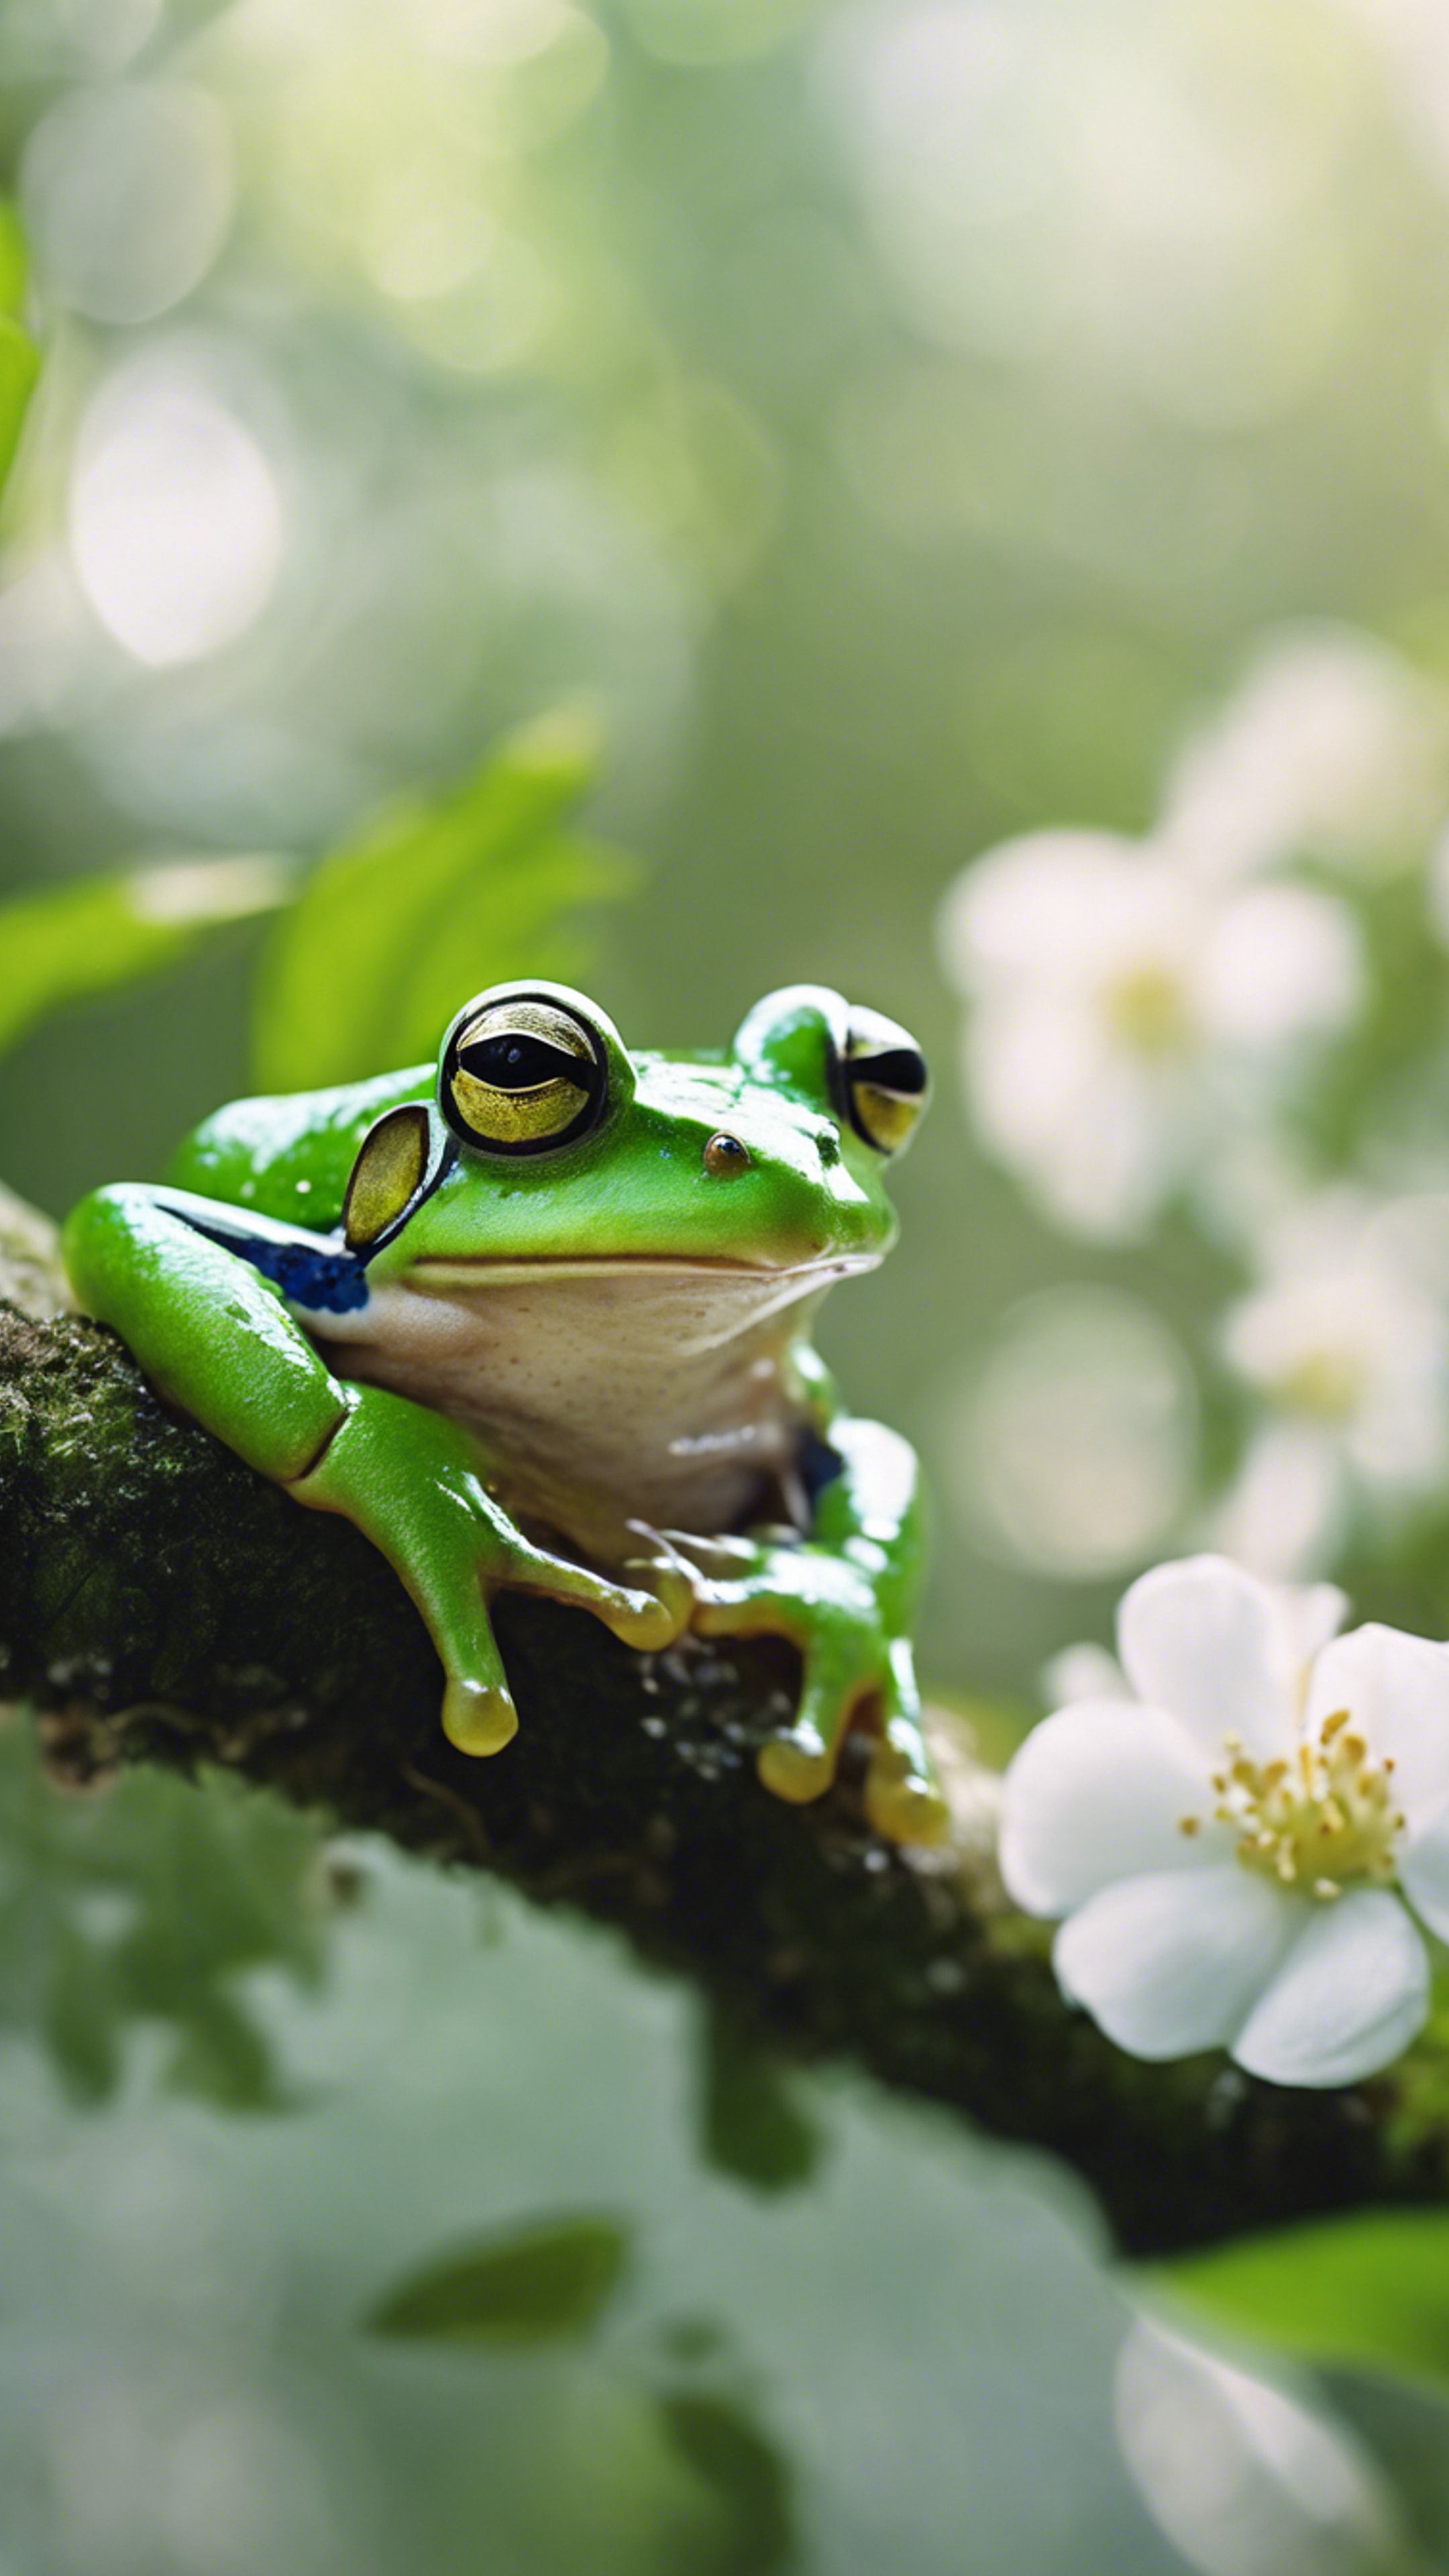 A bright green frog on a white blossom in the rainforest ورق الجدران[dcf59f9895044df59e99]